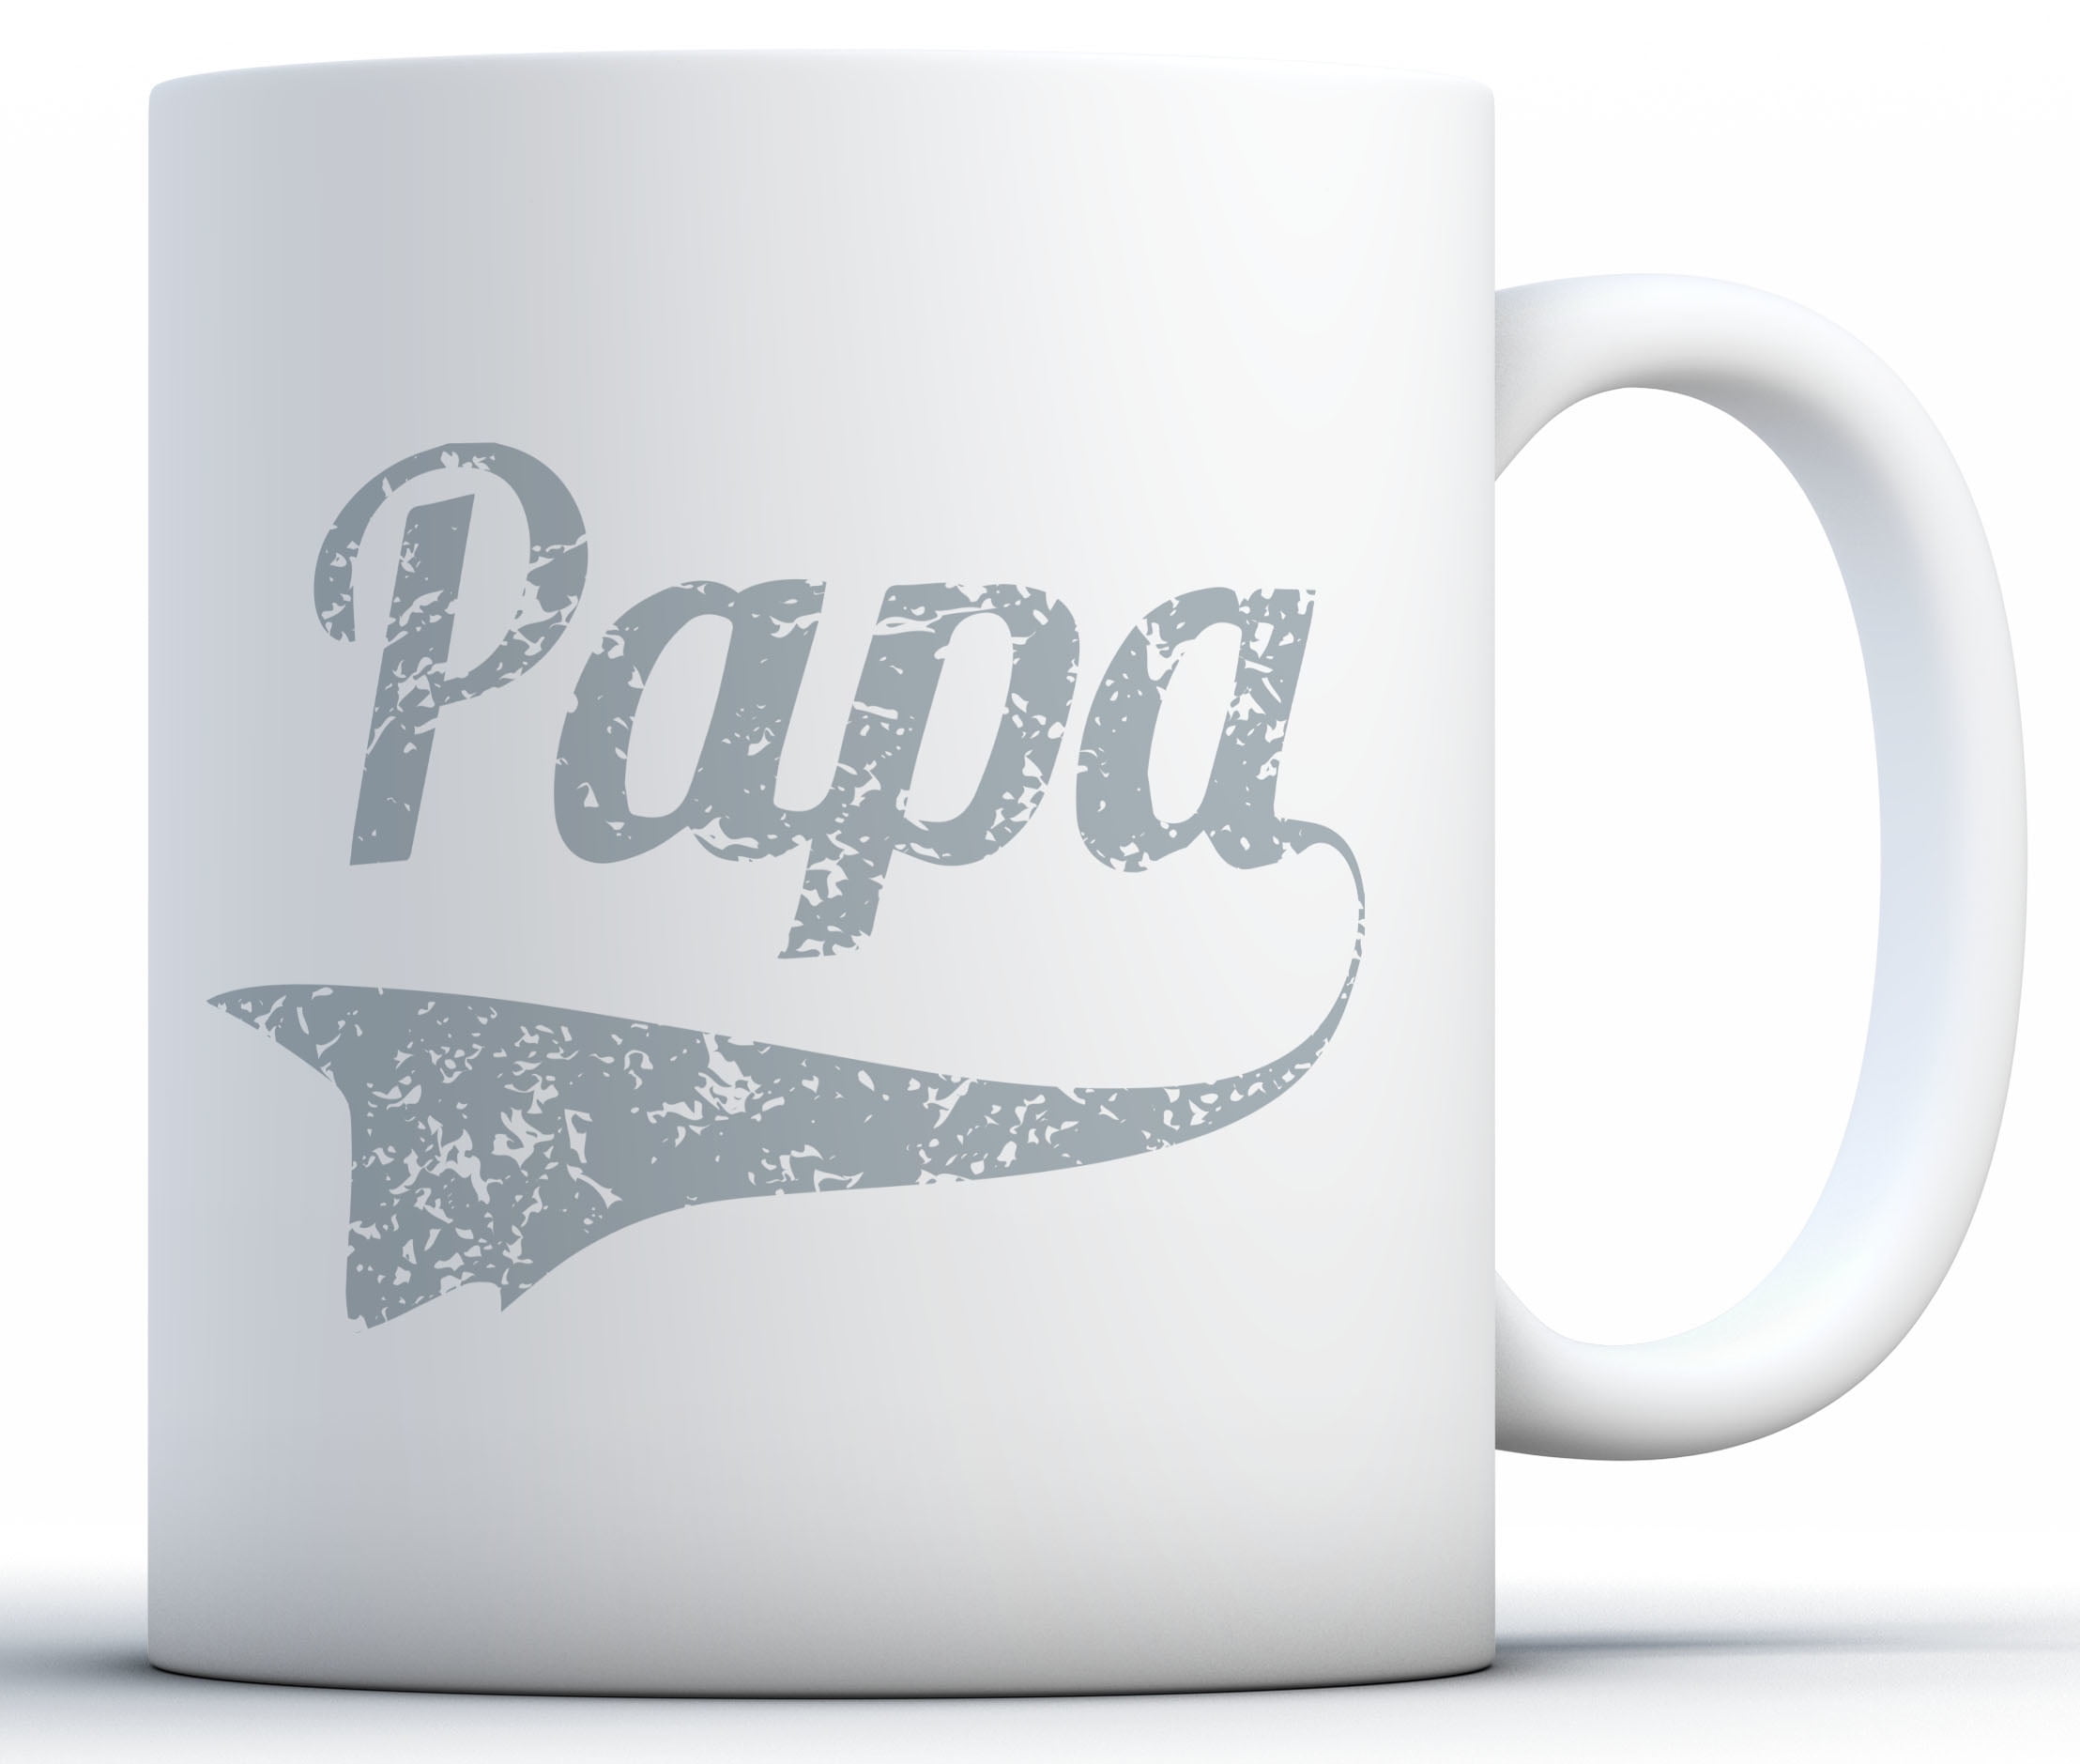 Gifts from Grandkids Worlds Best Papa Ever Cup #1 Papa Gift Idea Father's Day Best Papa Coffee Mug Grandparents Day Birthday